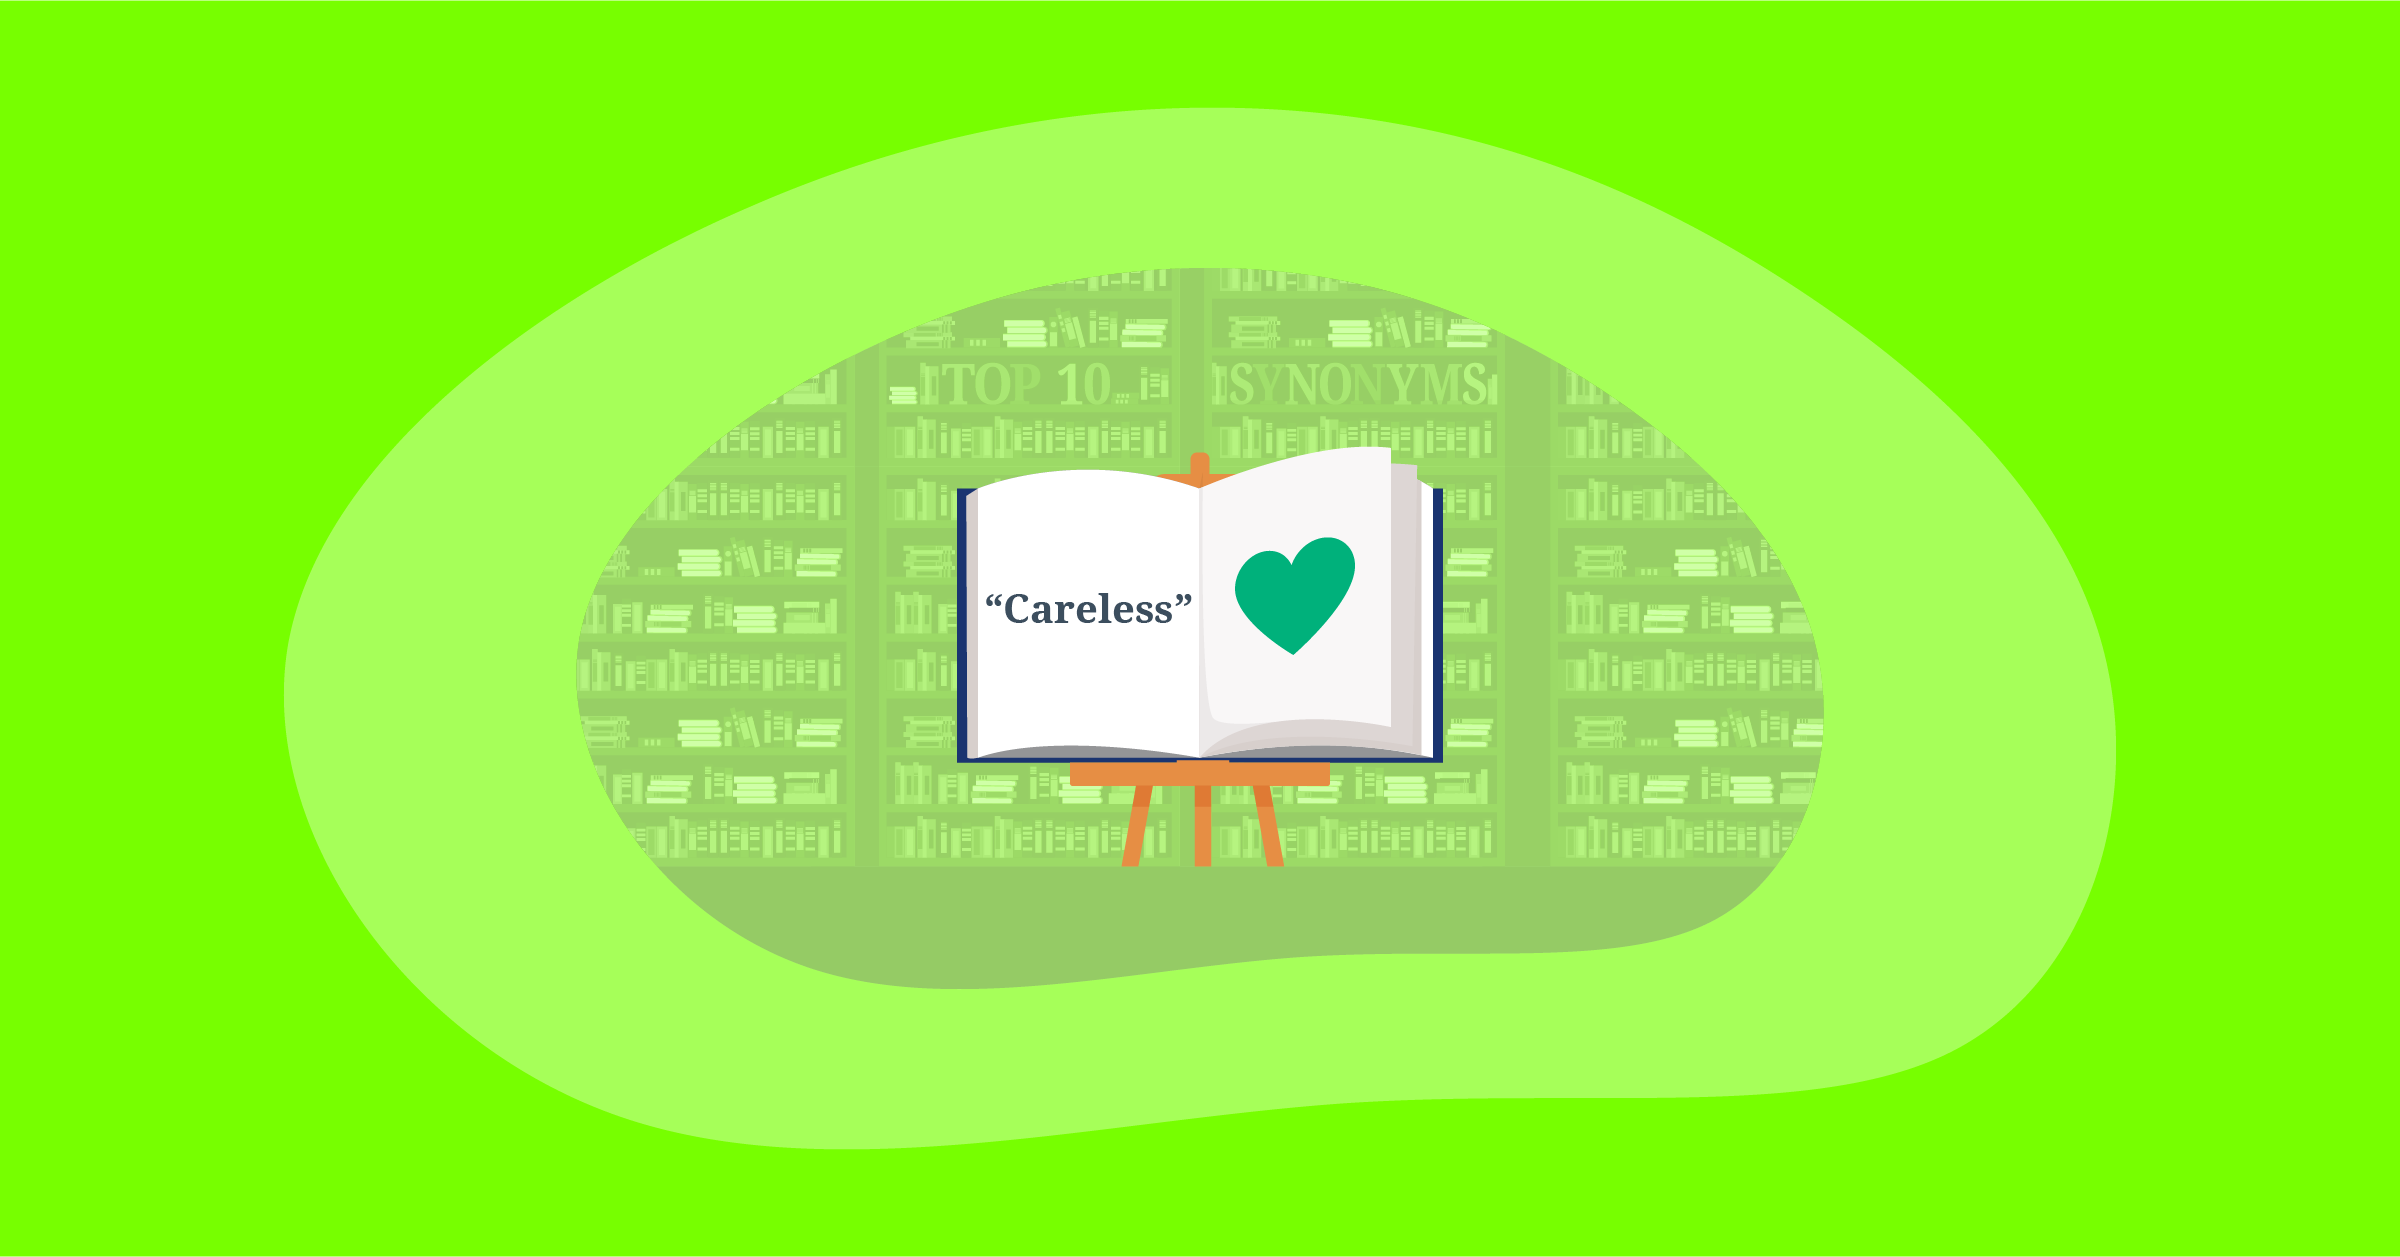 Illustration for Top 10 Positive & Impactful Synonyms for “Careless”